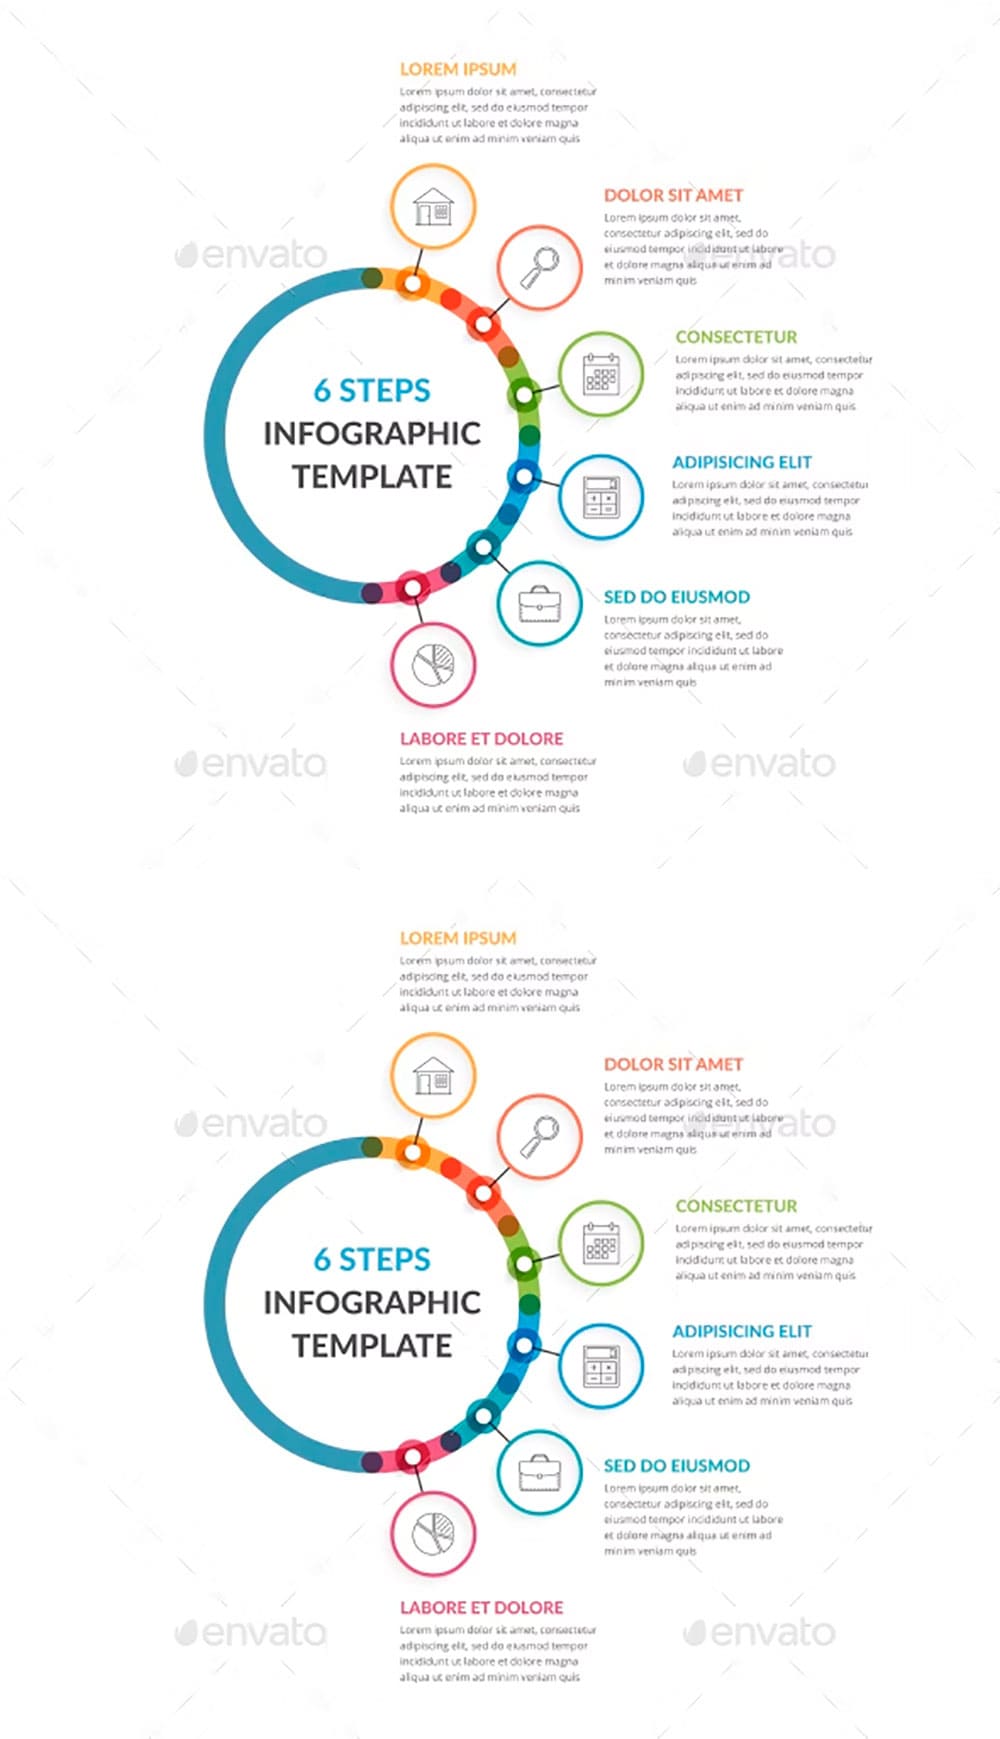 Infographic template with six steps, picture for pinterest.